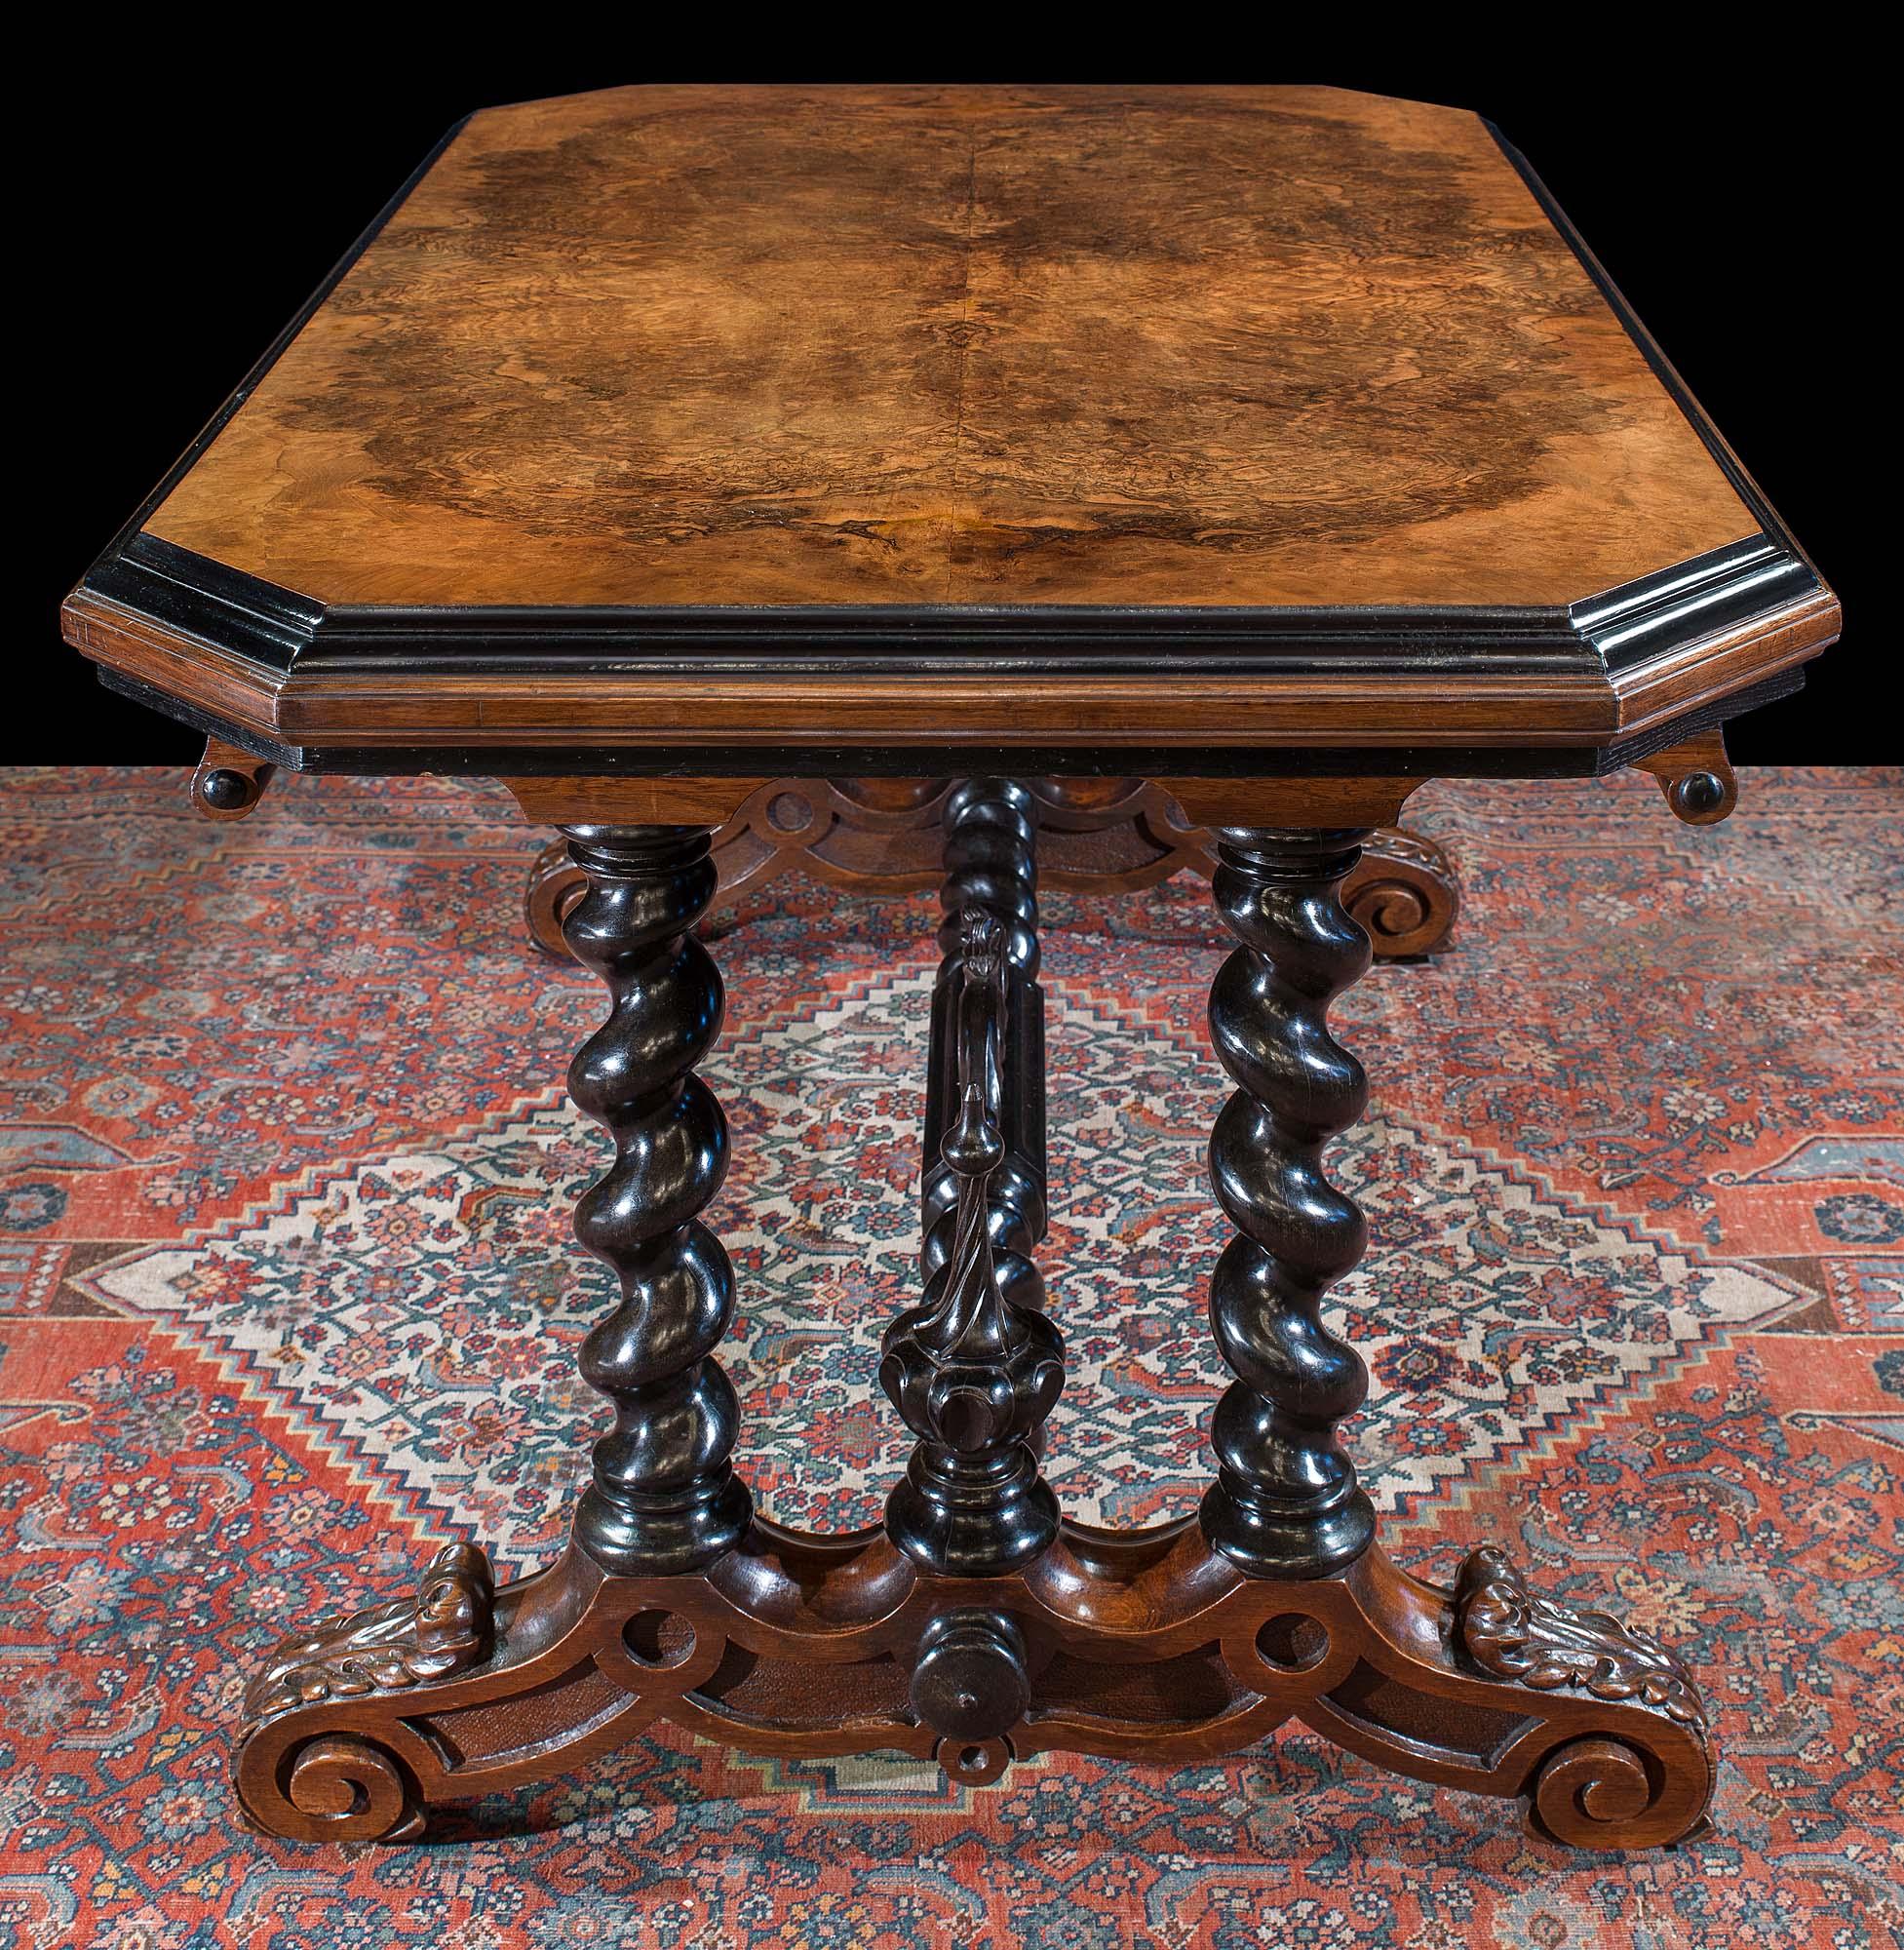 A superb Victorian walnut and solid ebony library table. This outstanding table is made especially rare by having solid ebony legs, stretcher and finials. The beautifully carved Solomonic legs and stretcher support a fine burr walnut top.

This